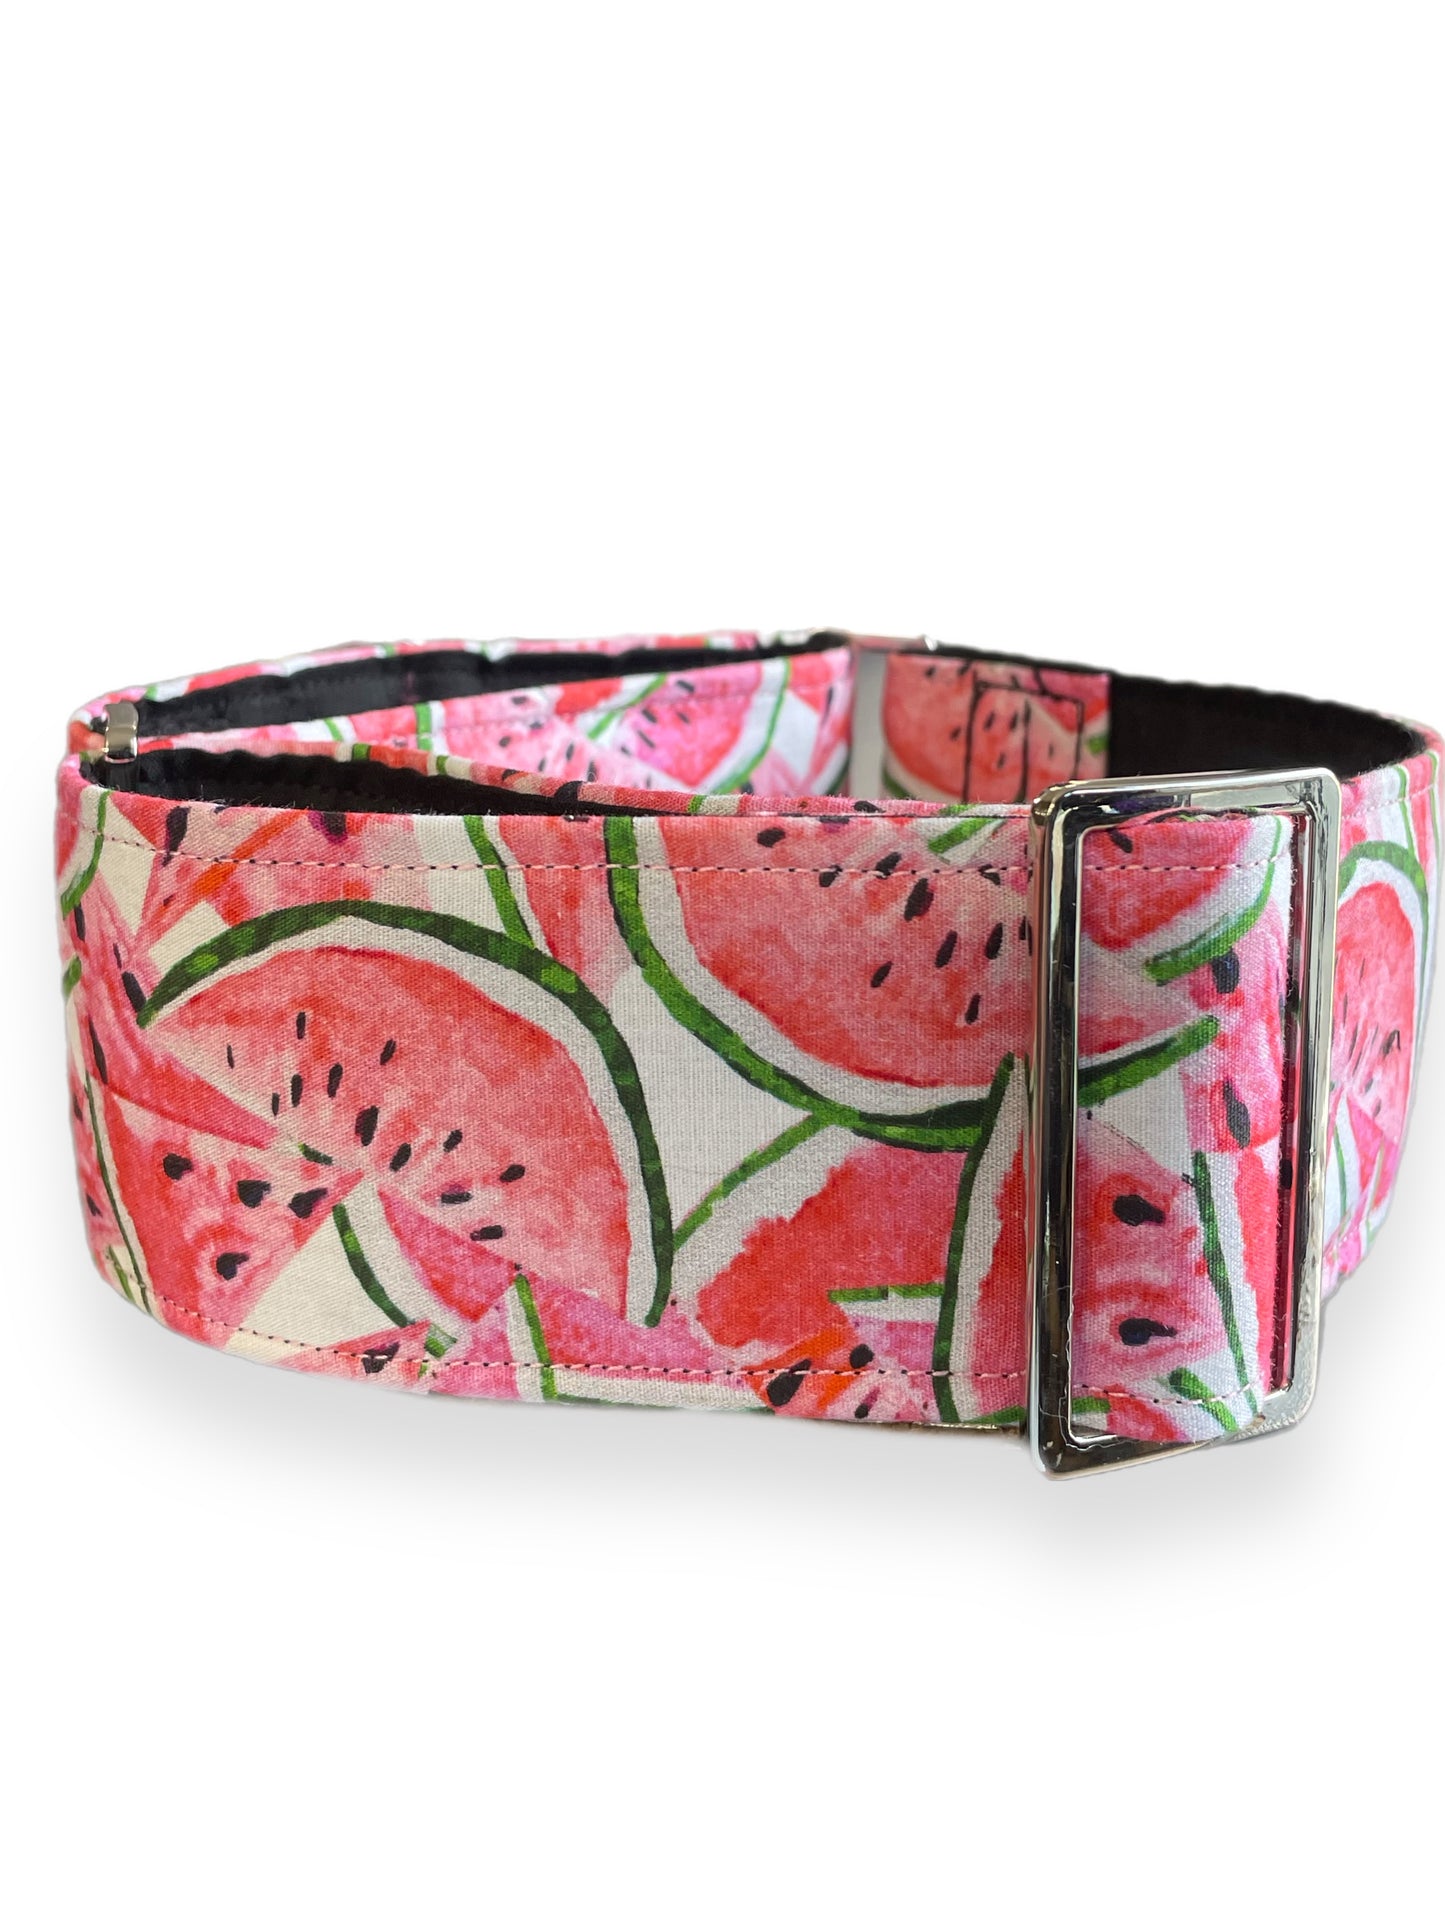 Watermelon in soft tones  greyhound Martingale collar cotton covered 50mm width super soft